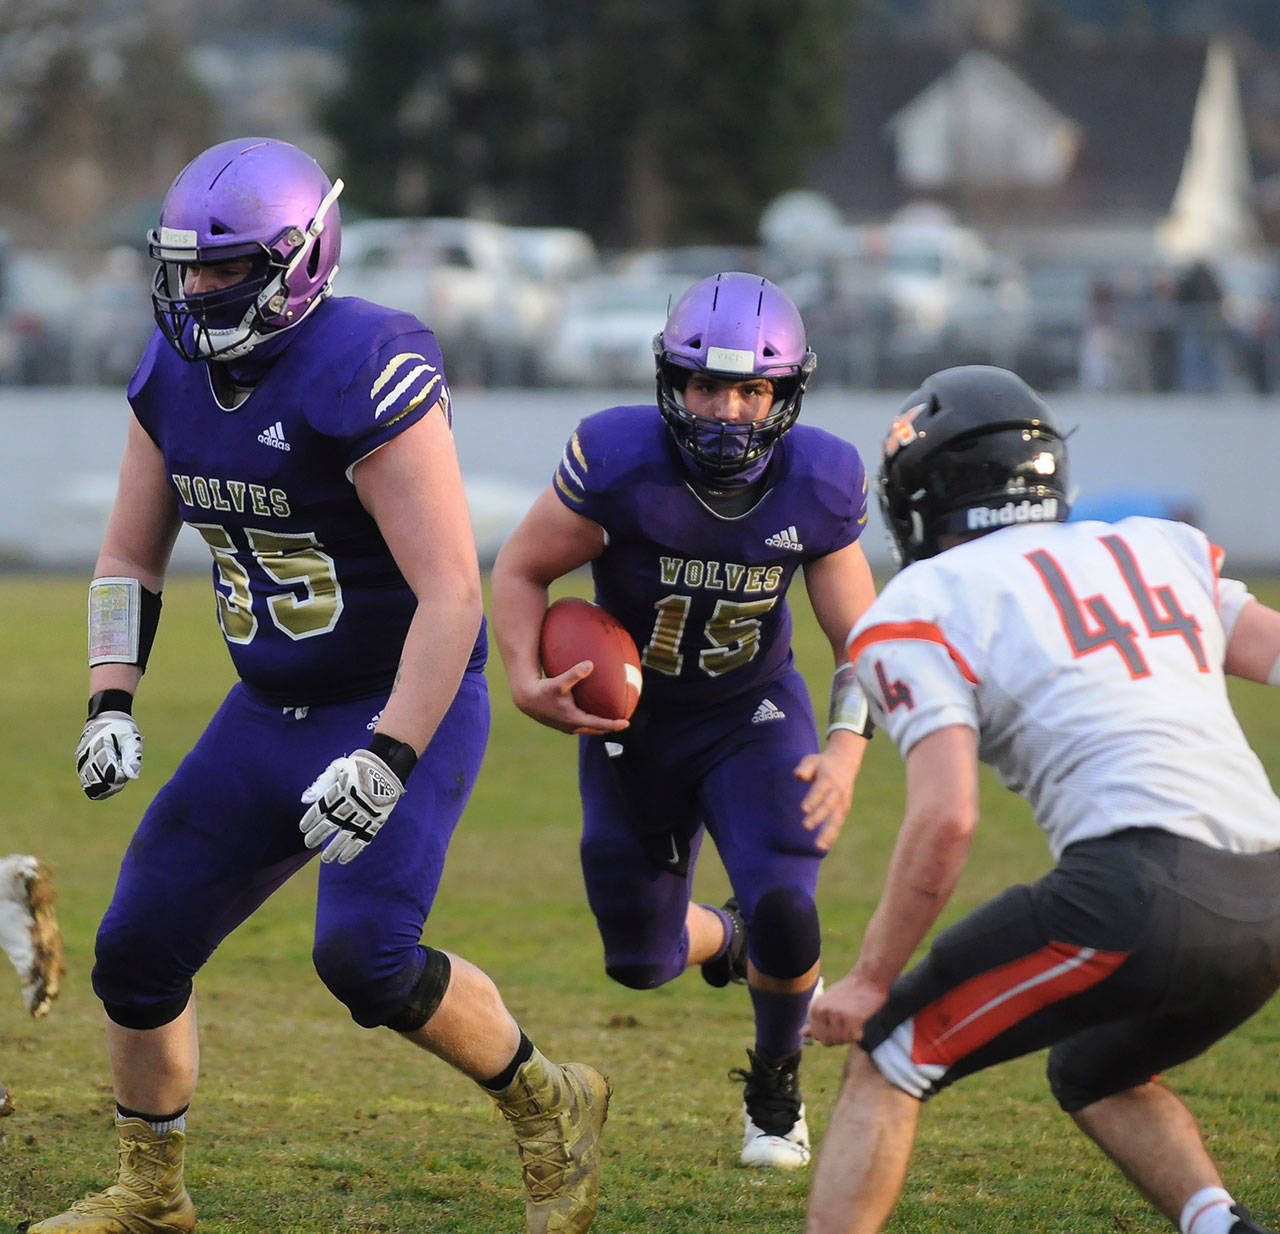 Sequim quarterback Taig Wiker gets some key blocking from Brandon Barnett (55) in the first half of Sequim’s season finale against Central Kitsap on March 18. Sequim Gazette photo by Michael Dashiell